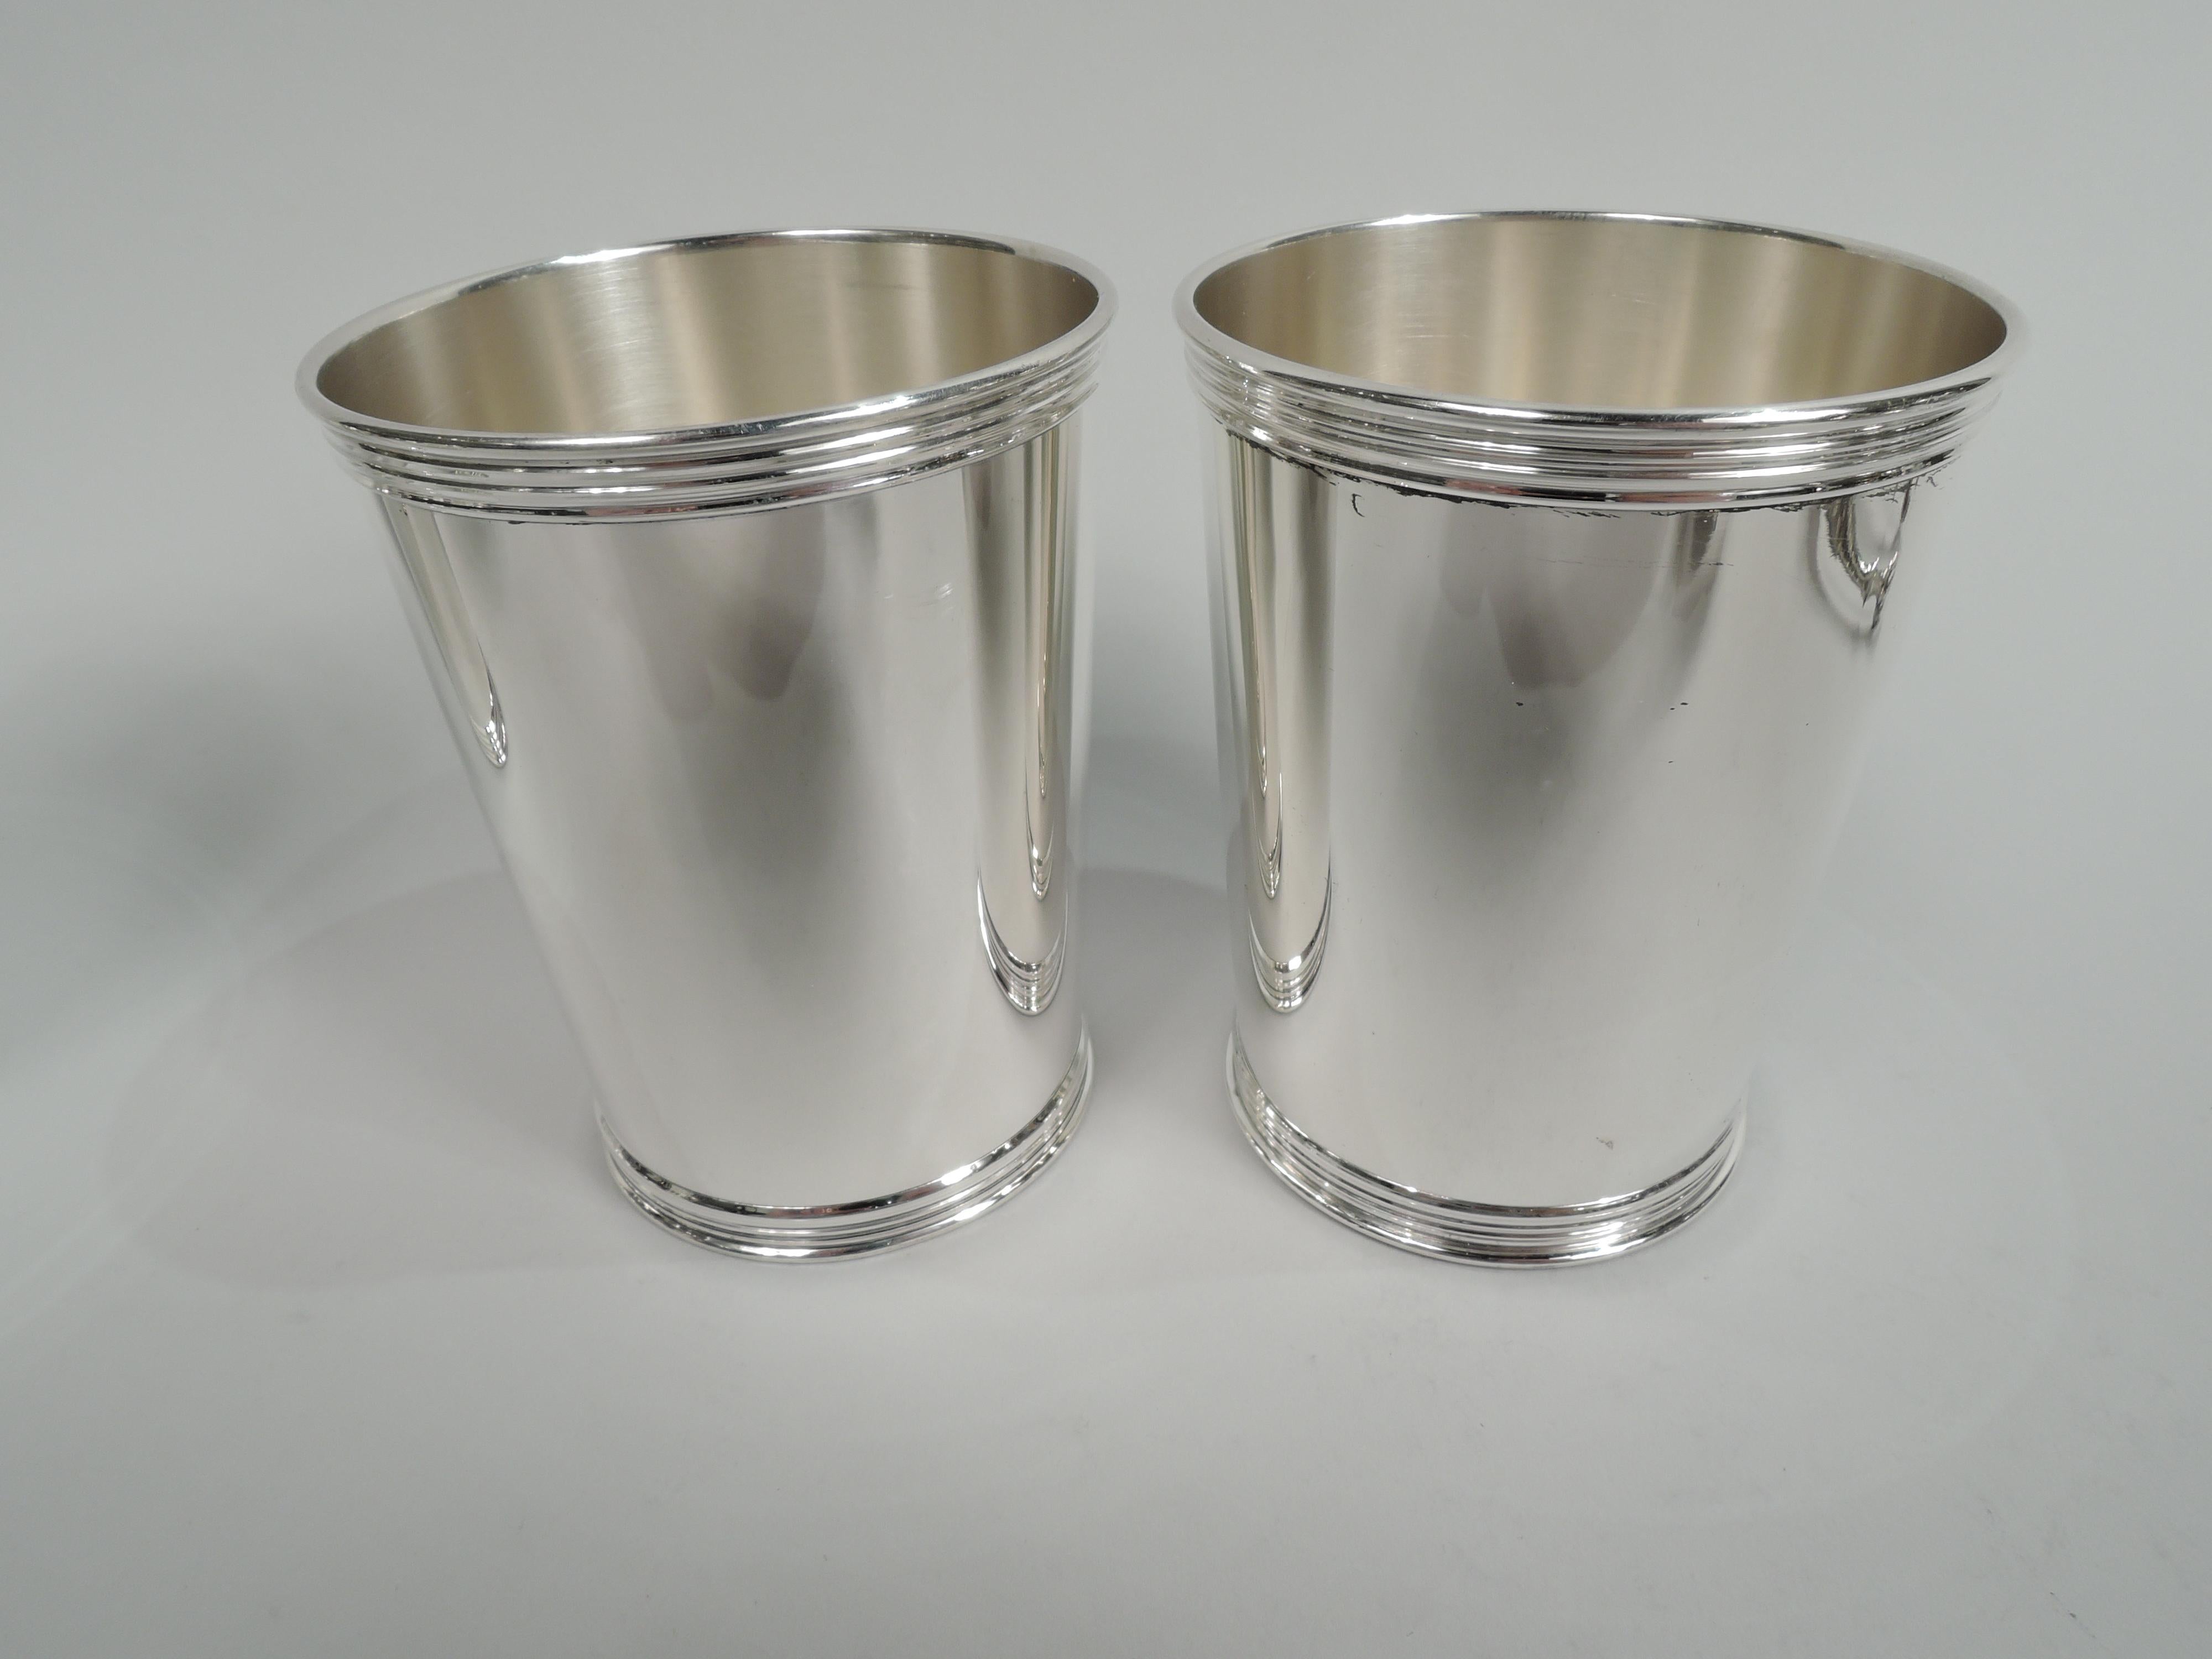 Set of 6 sterling silver mint julep cups. Each: Straight and tapering sides, and reeded rim and foot. A great way to celebrate Derby day with a few close friends. Marked “Sterling / Trees” with Tree stamp. Benjamin Trees was active in Lexington,